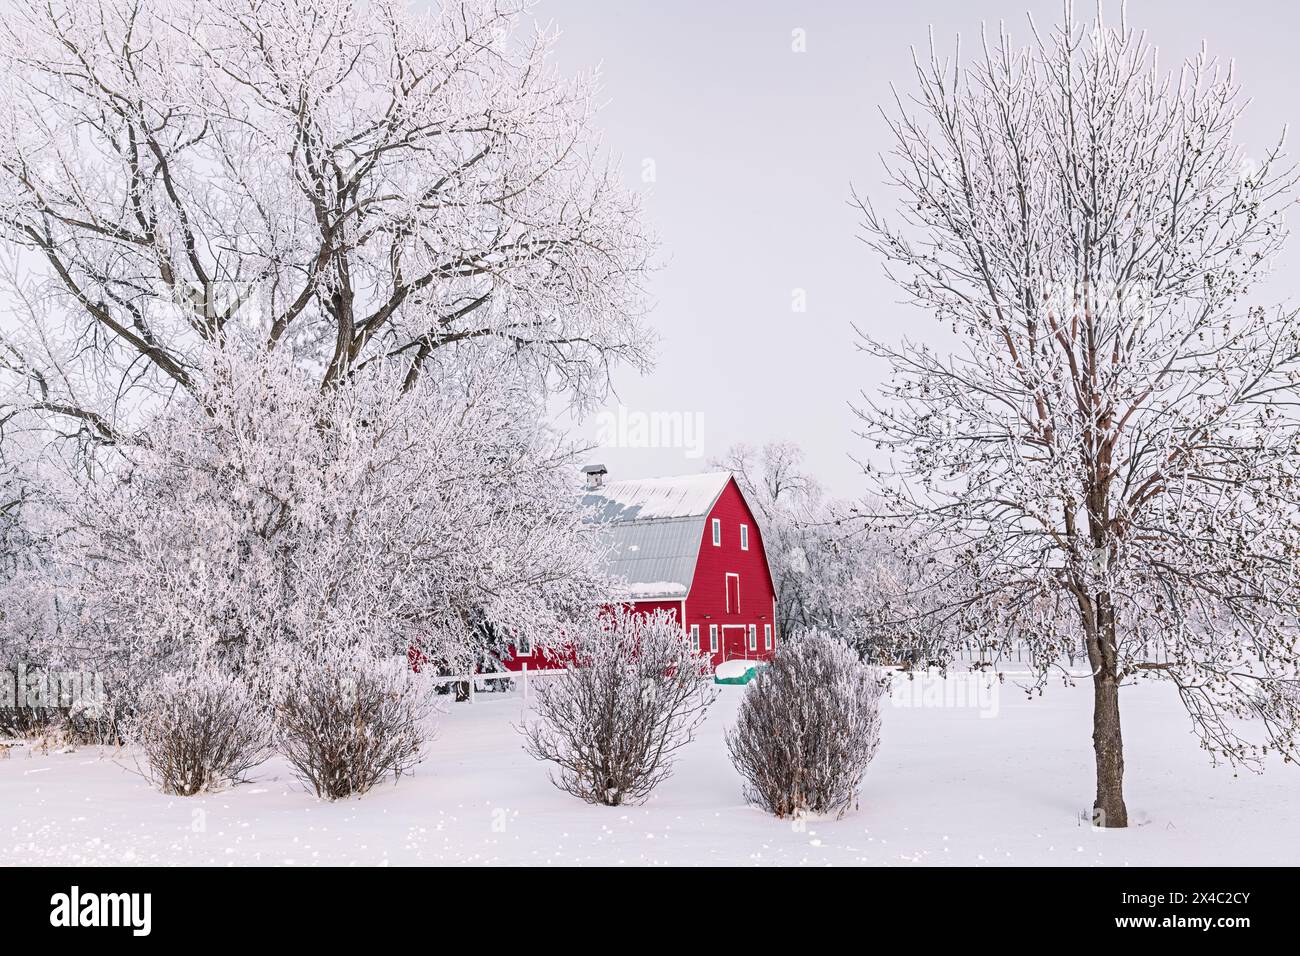 Canada, Manitoba, Grande Pointe. Red barn with rime ice on trees. (Editorial Use Only) Stock Photo